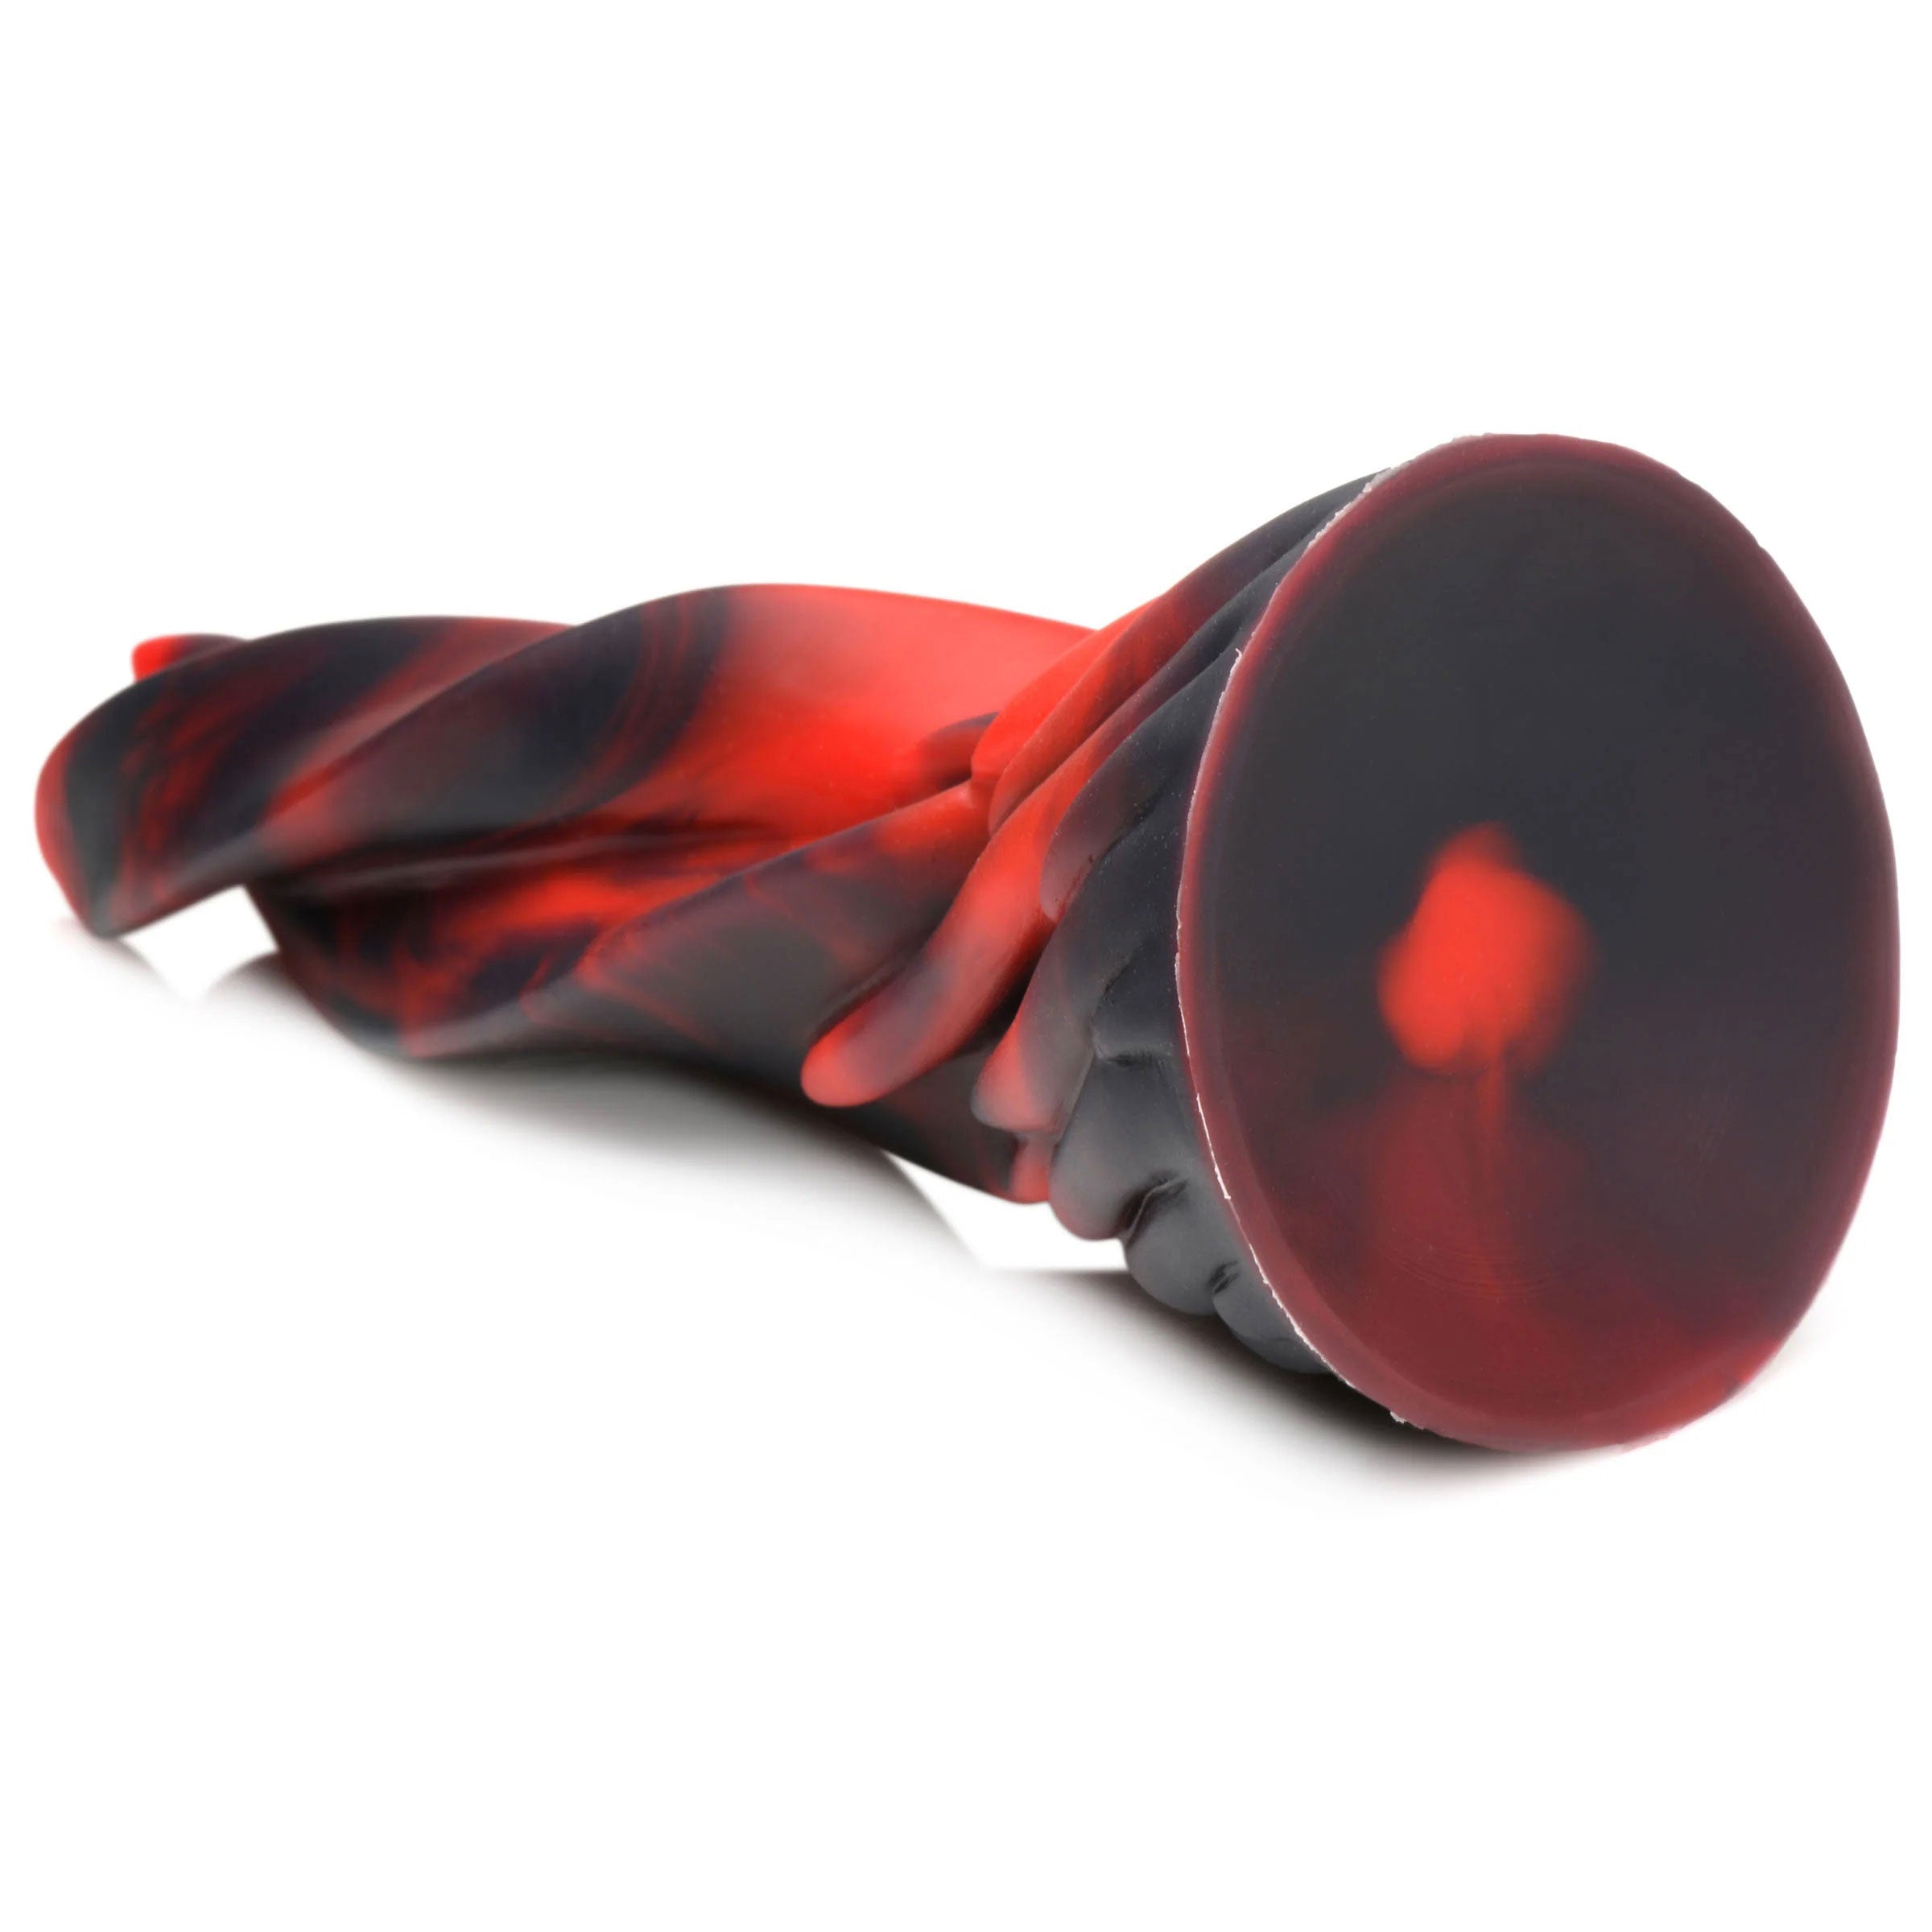 Hell Kiss Twisted Fantasy Dildo made of Silicone by Creature Cocks